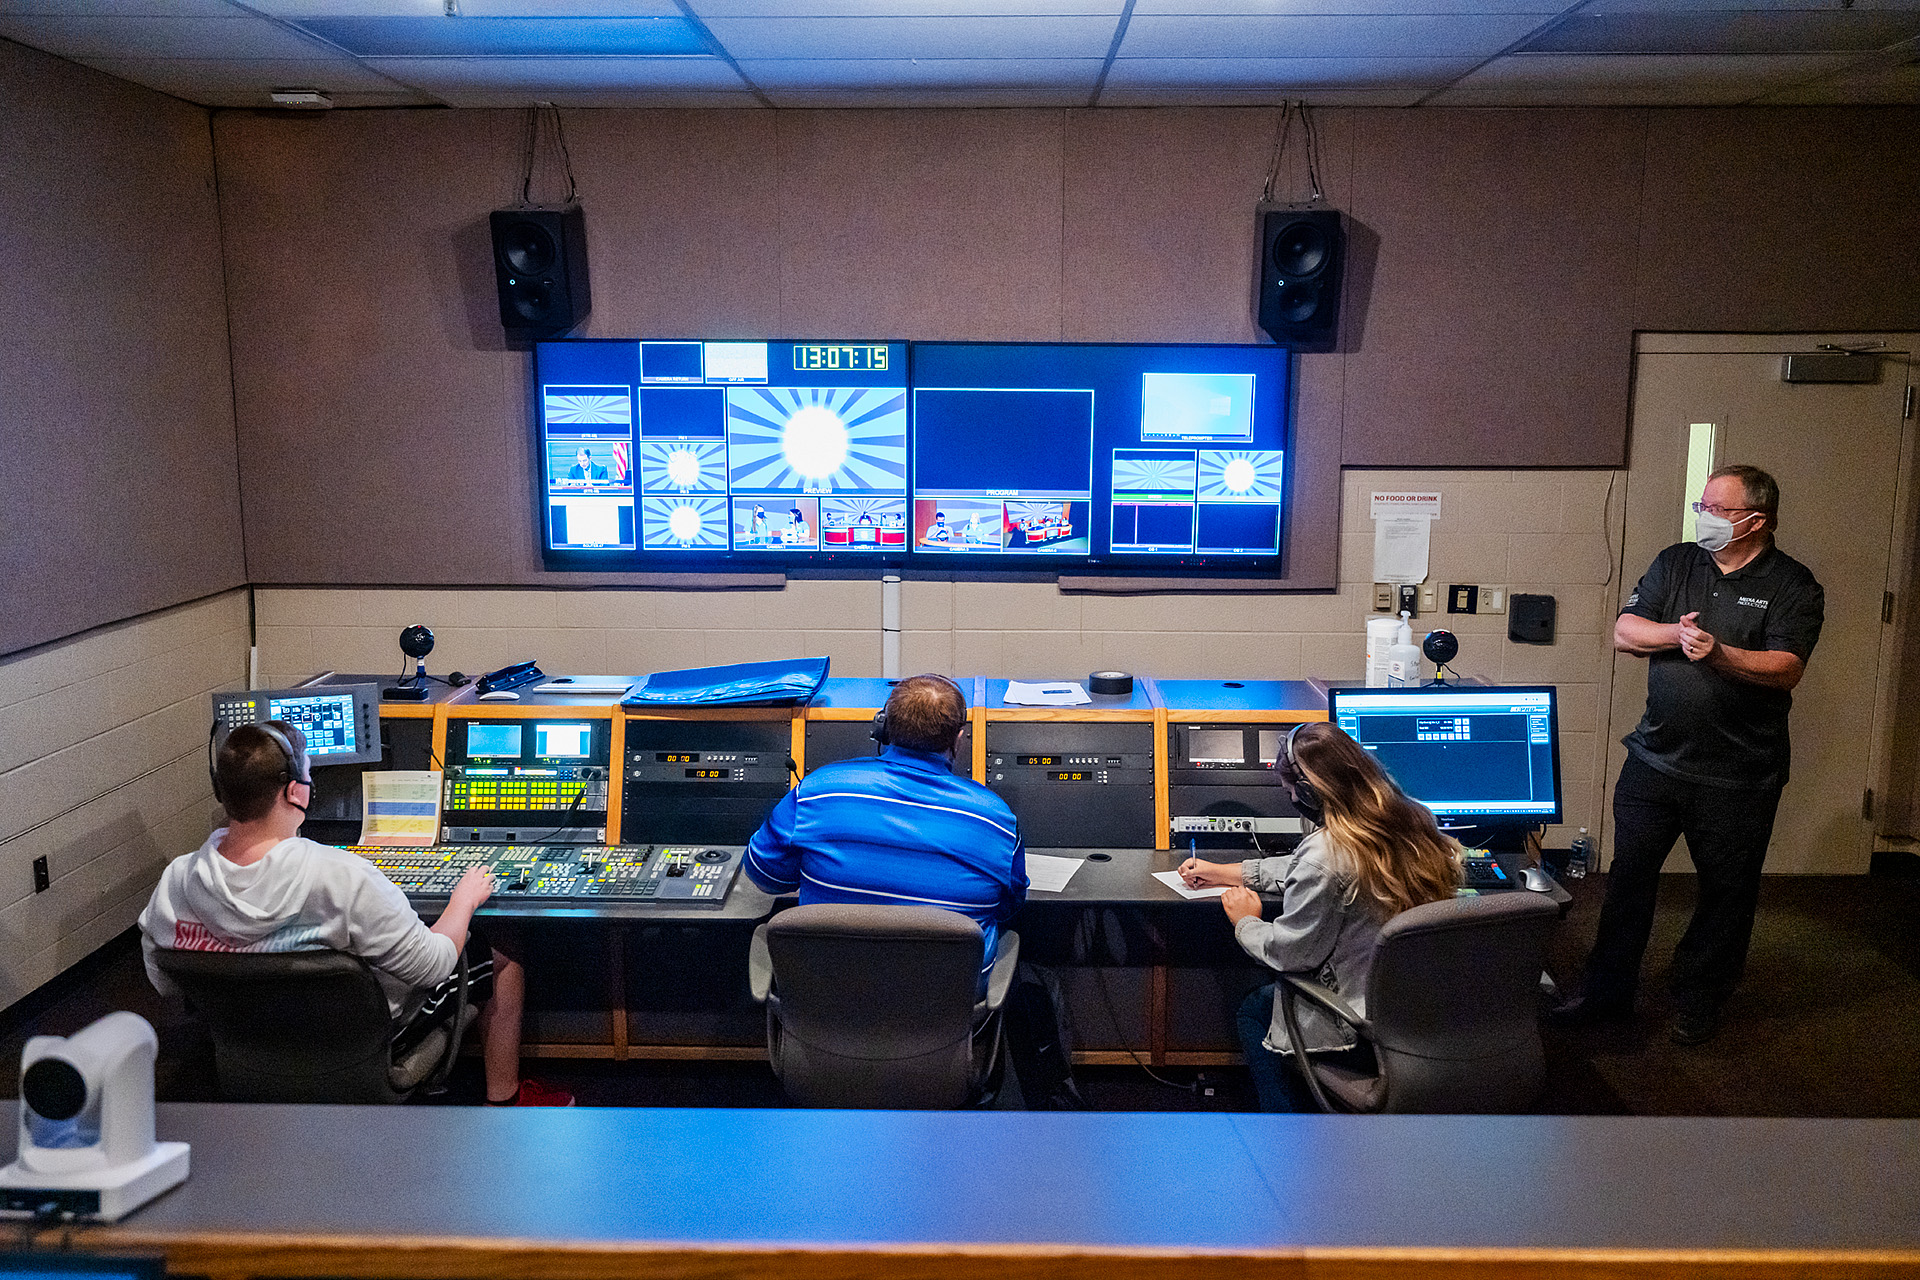 MTSU Department of Media Arts students produce one of six episodes of their game show "Don't @ Me" in Studio 1 of the Bragg Media and Entertainment Building as professor Robert "Bob" Gordon Jr., right, looks on. From left are students Walker Oakes, Ryan Tyler and Jordyn Lee and Gordon. (MTSU photo by Andy Heidt)